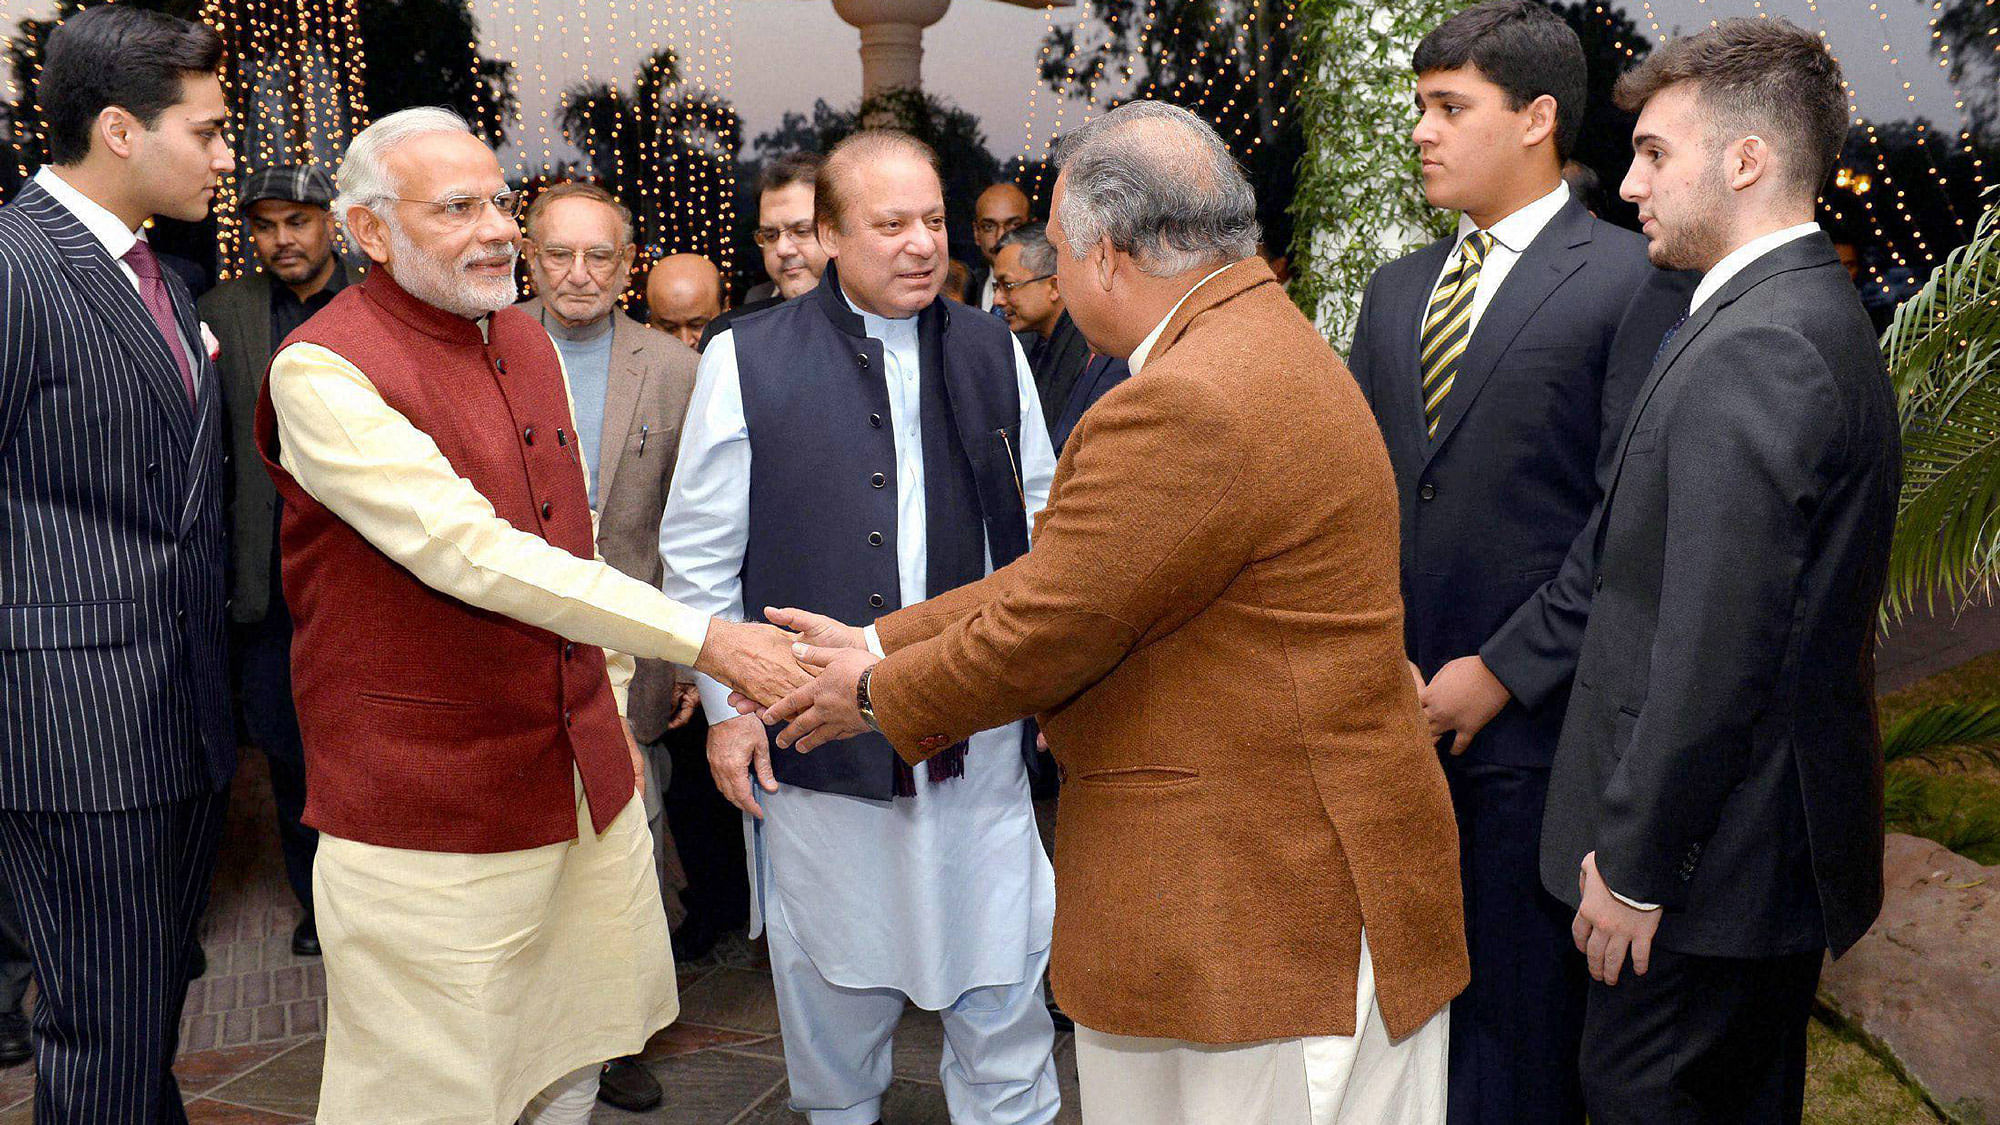 Prime Minister Narendra Modi is greeted at the residence of his Pakistani counterpart Nawaz at Raiwind in Lahore on Friday. (Photo: PTI)